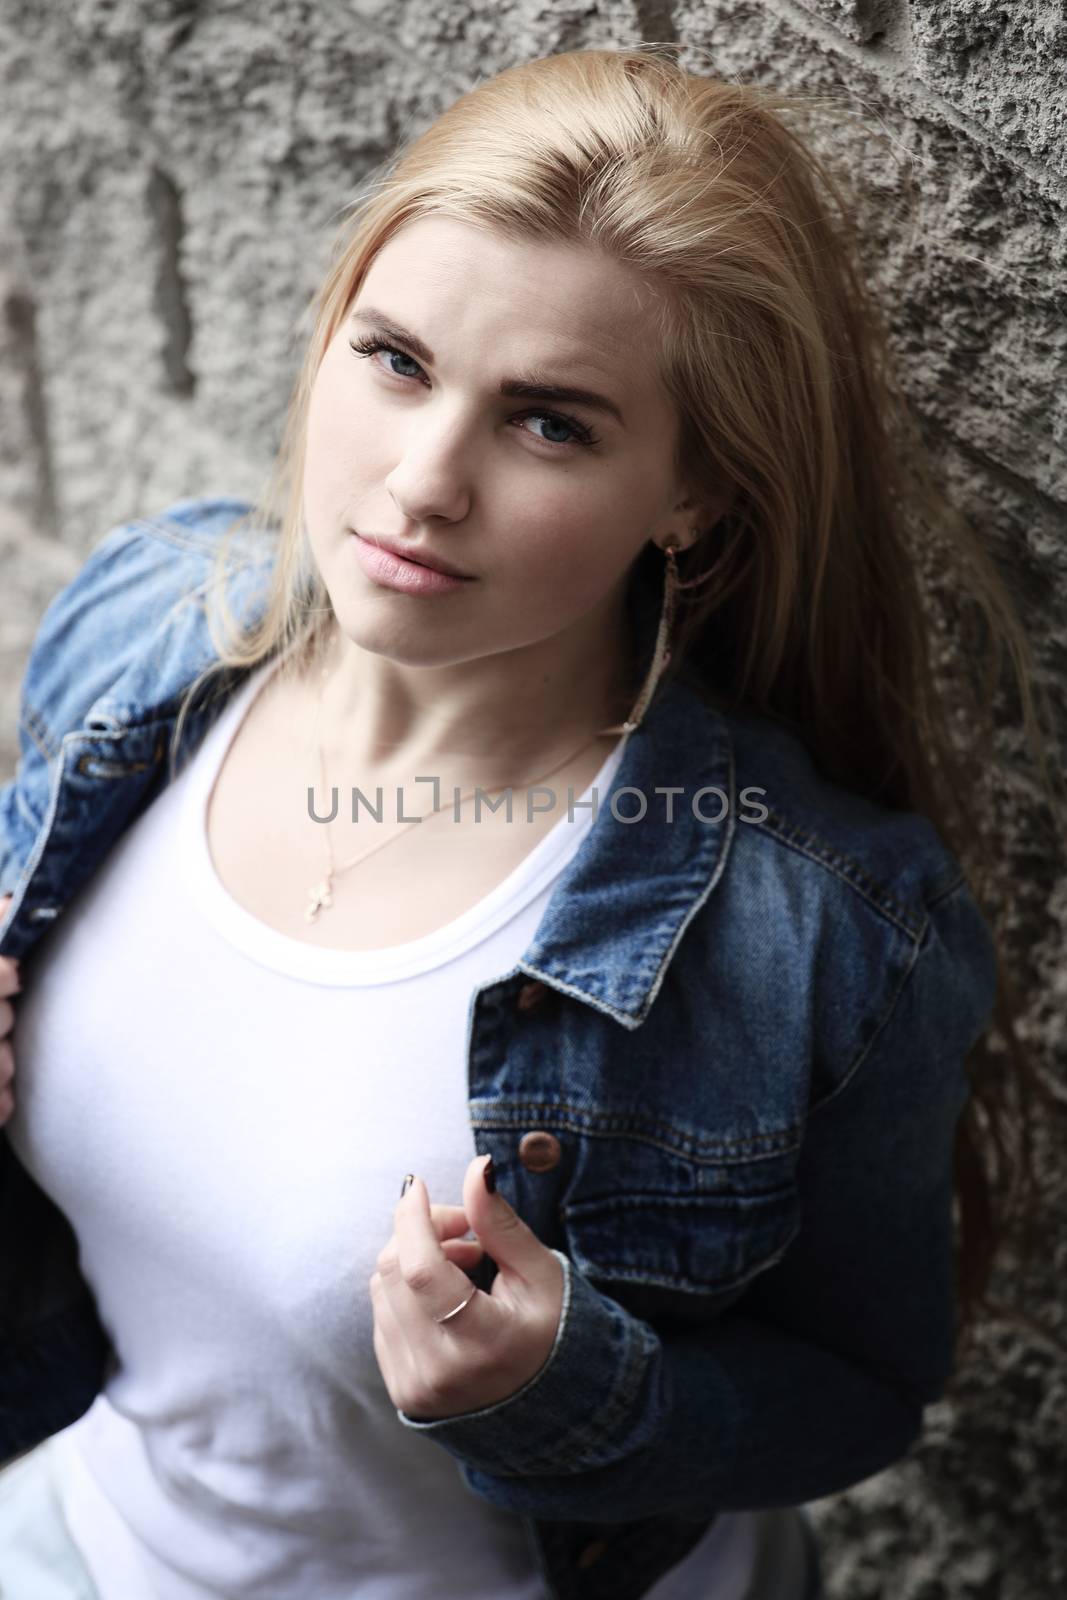 Urban style portrait of young beautiful blond woman in denim